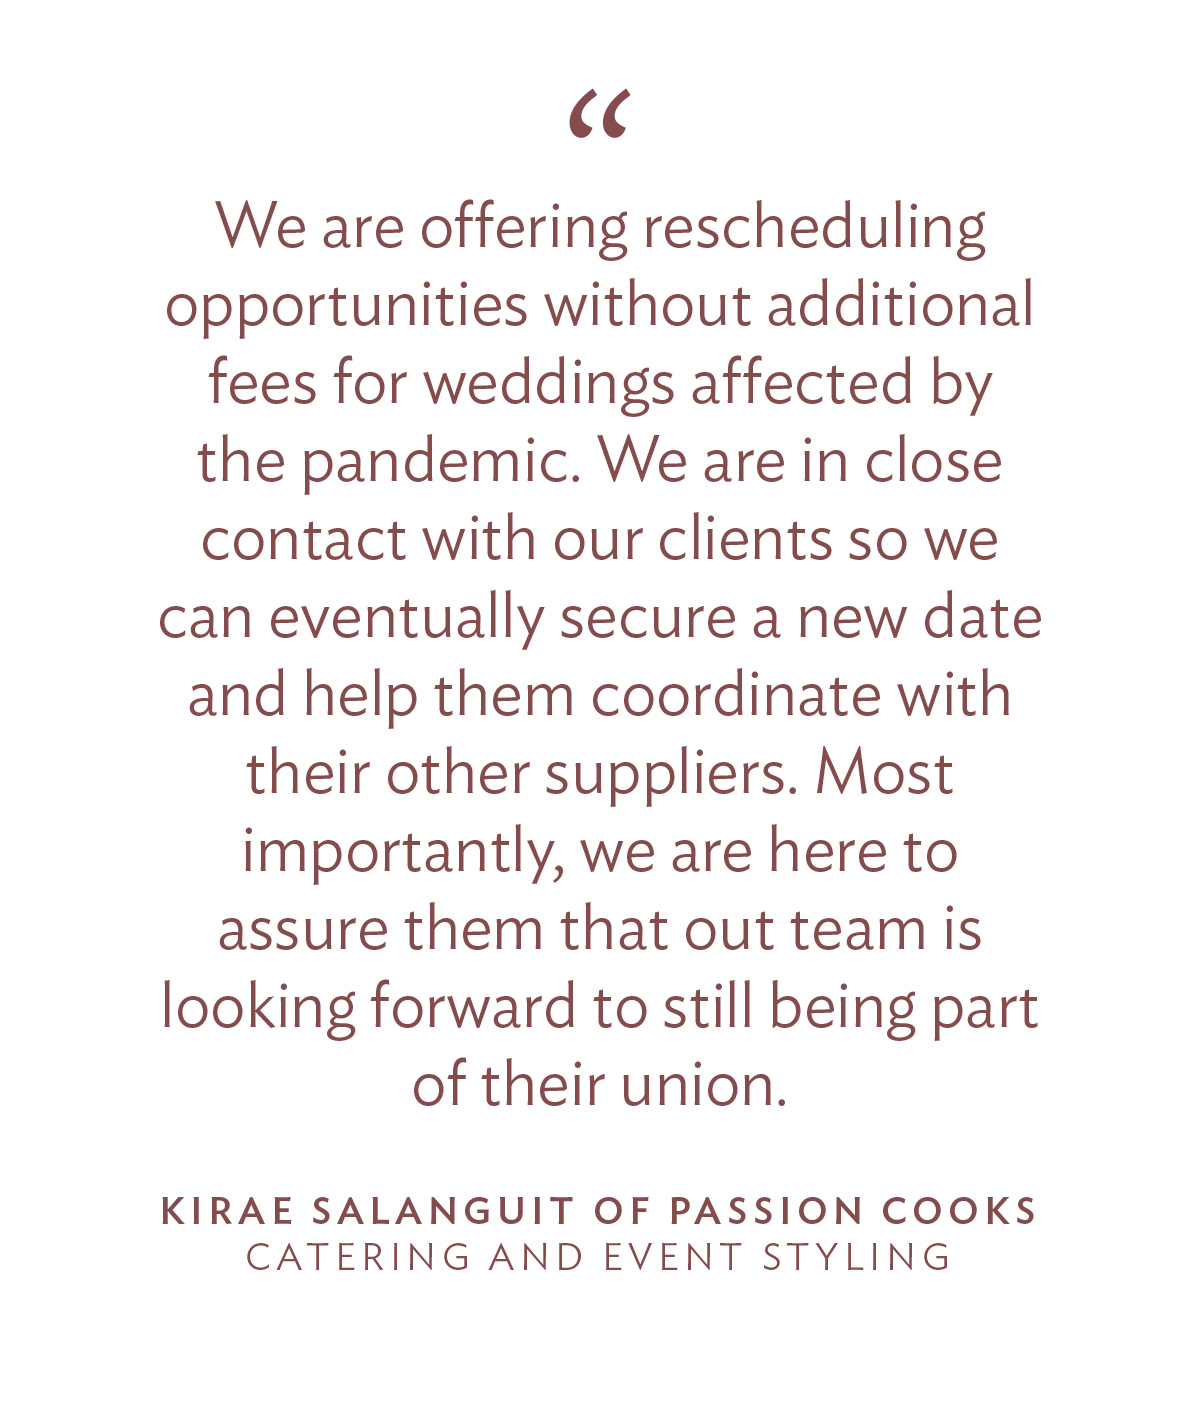 “We are offering rescheduling opportunities without additional fees for weddings affected by the pandemic. We are in close contact with our clients so we can eventually secure a new date and help them coordinate with their other suppliers. Most importantly, we are here to assure them that out team is looking forward to still being part of their union.” - Kirae Salanguit of Passion Cooks, Catering and Event Styling